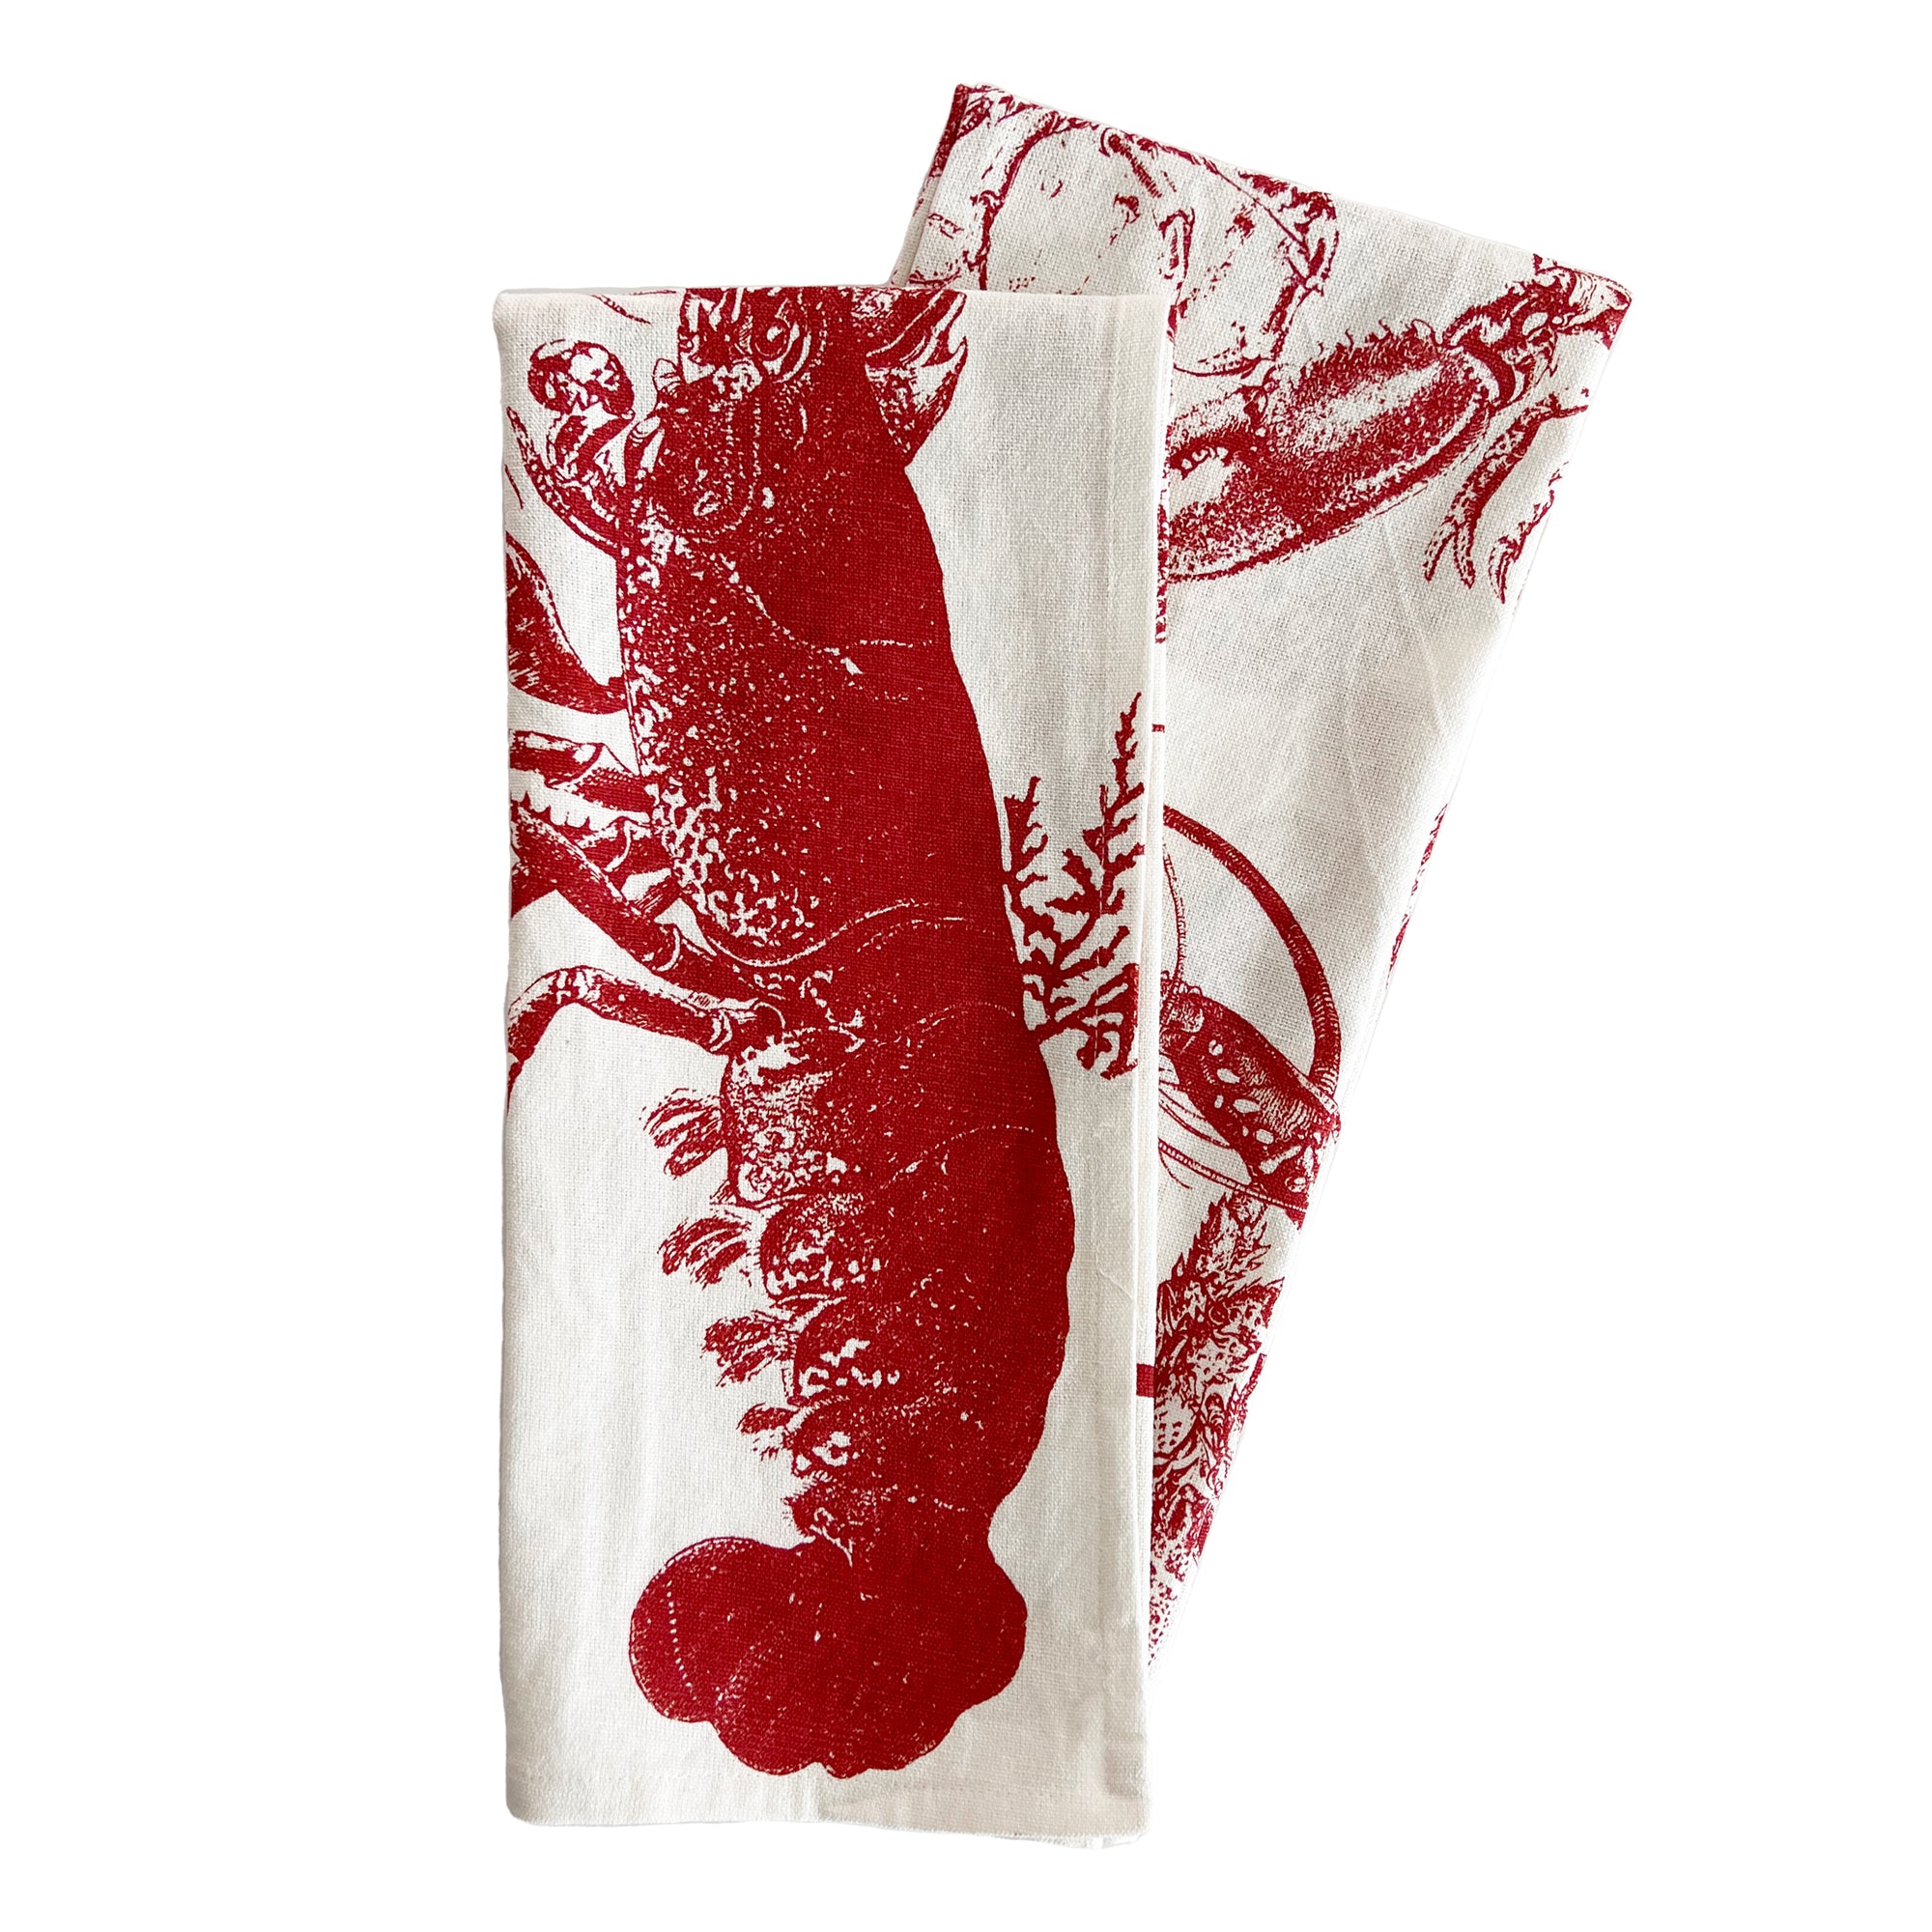 Lobster Kitchen Towel Set of 2 Mixed in Red and White Cotton from Caskata